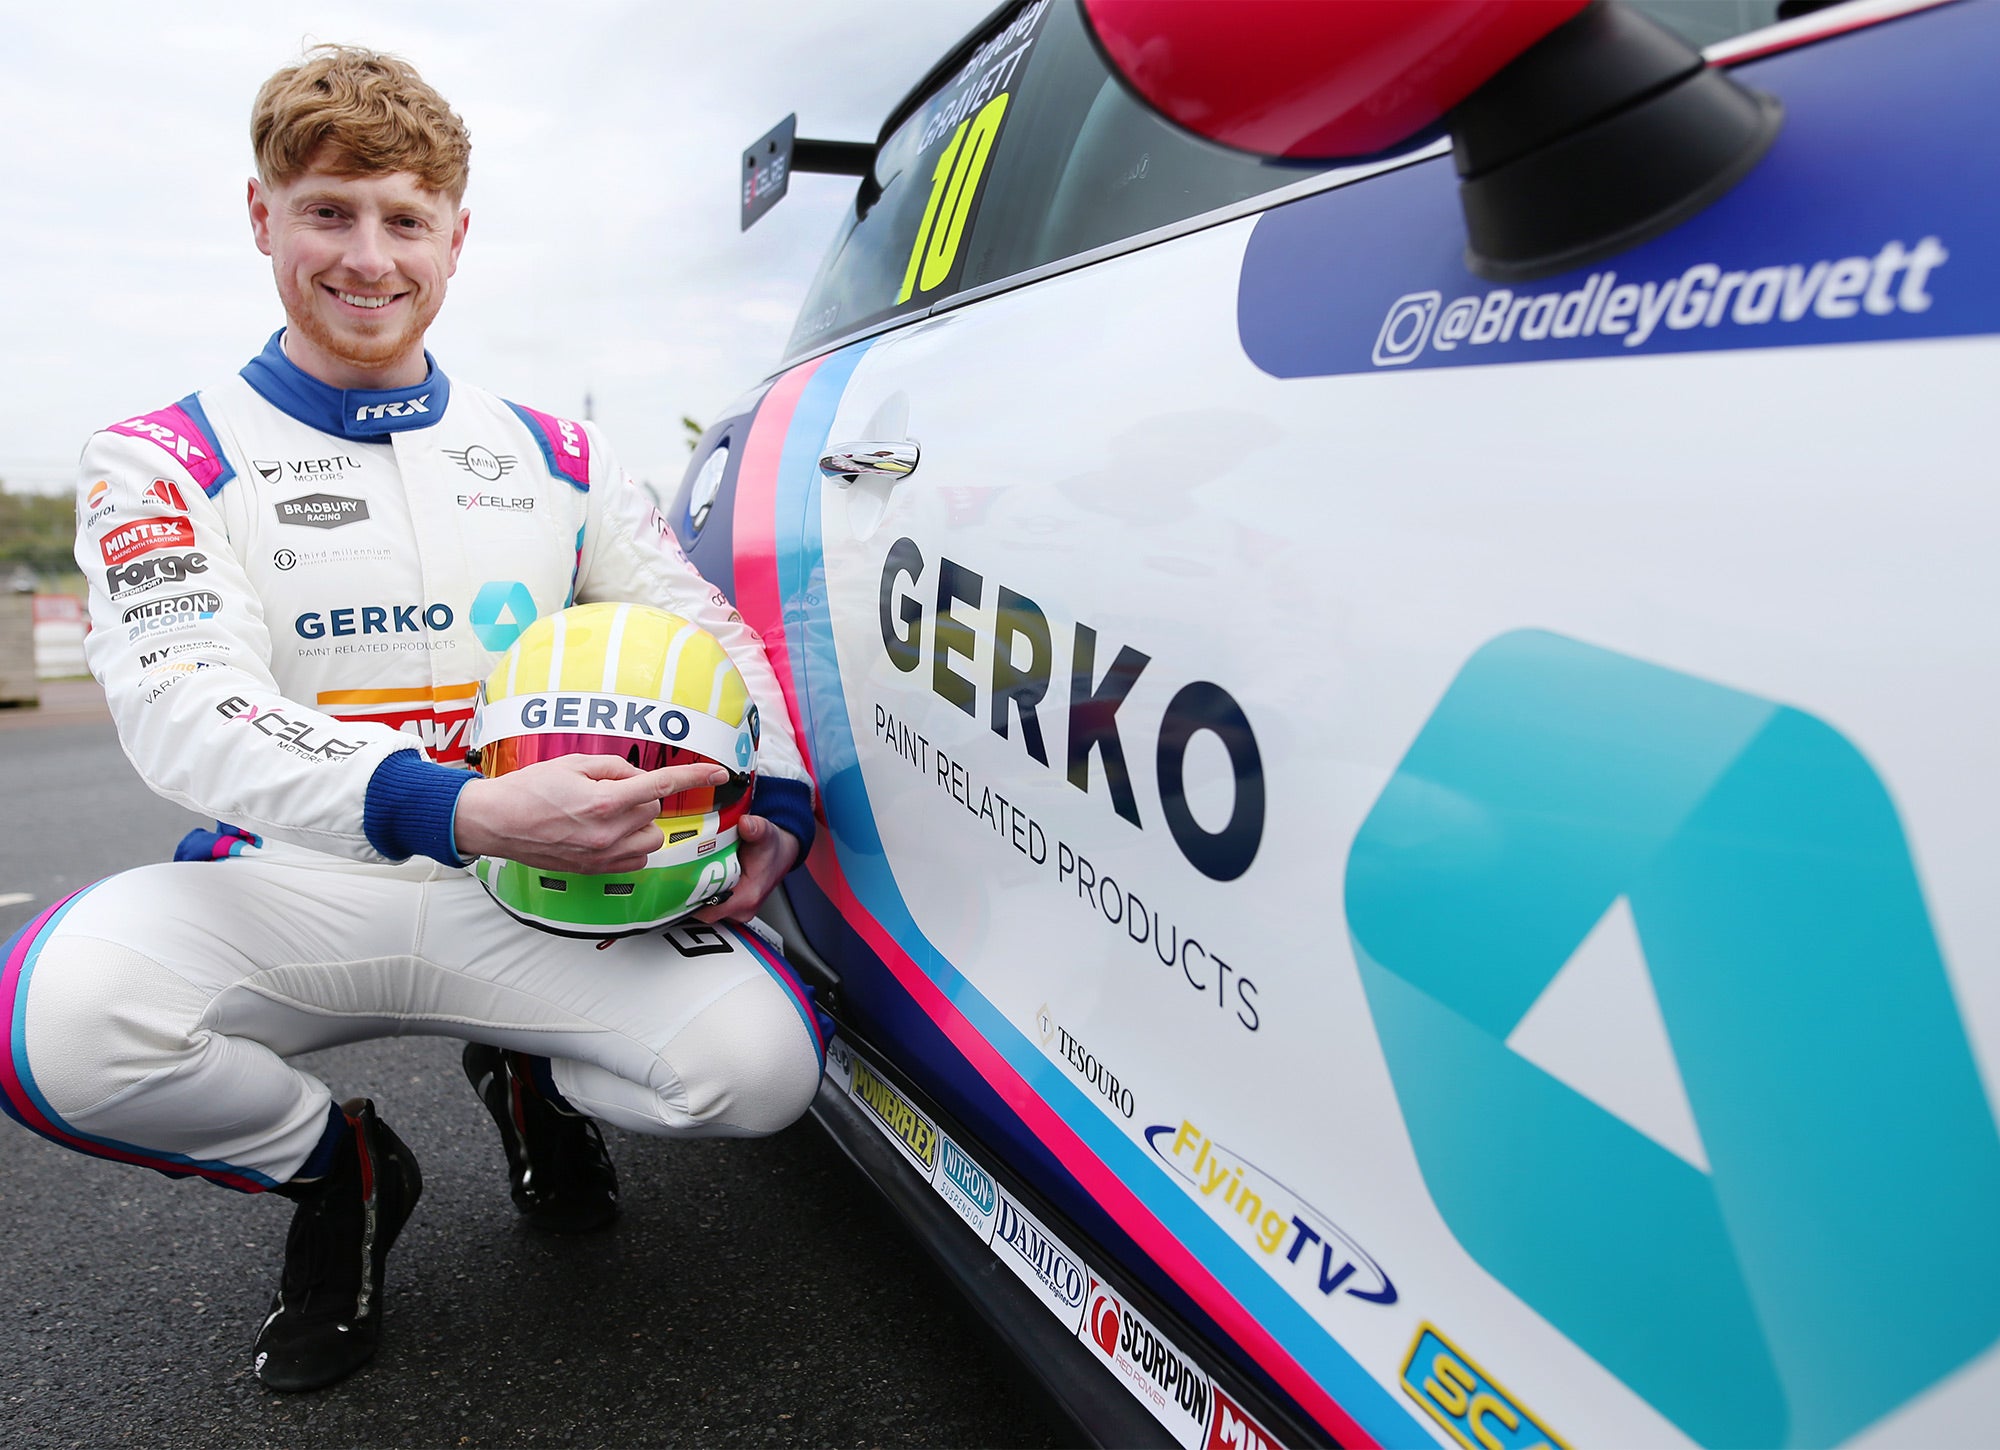 Gravett Racing Extends Partnership with Paint Related Products Brand GERKO International